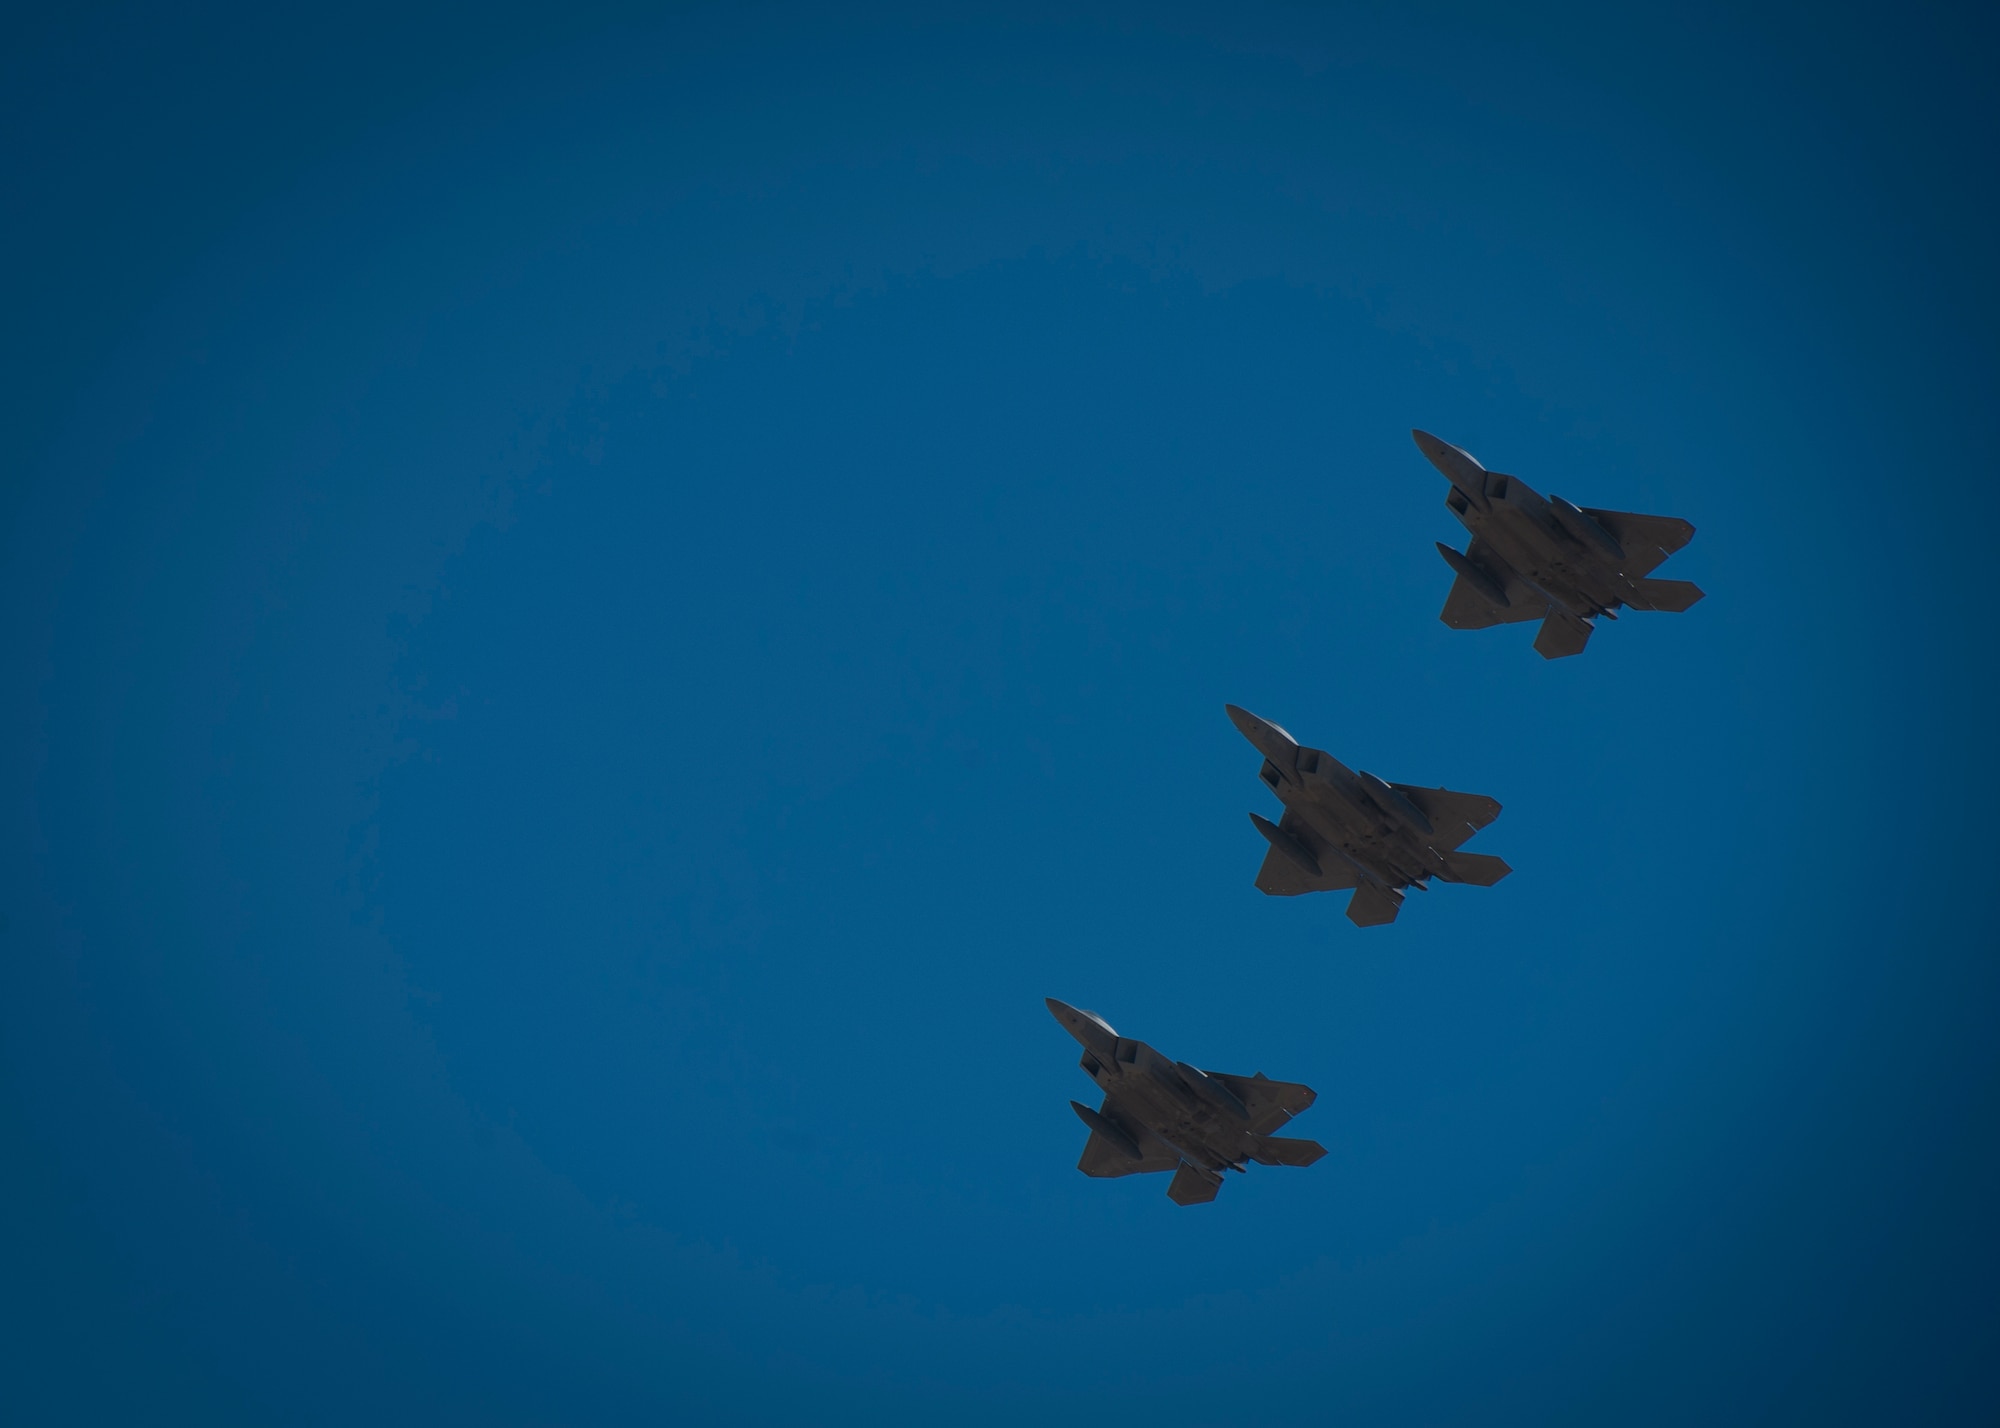 Three F-22 Raptors fly in formation over the base during their departure from Holloman Air Force Base, N.M., Jan. 6. The first five of 24 combat-deployable F-22 Raptors left Holloman heading to Tyndall Air Force Base, Fla. as a permanent change of station. The five F-22s that left Jan. 6 will be followed by six Raptors leaving each month until the move is completed. (U.S. Air Force photo by Airman 1st Class Aaron Montoya)